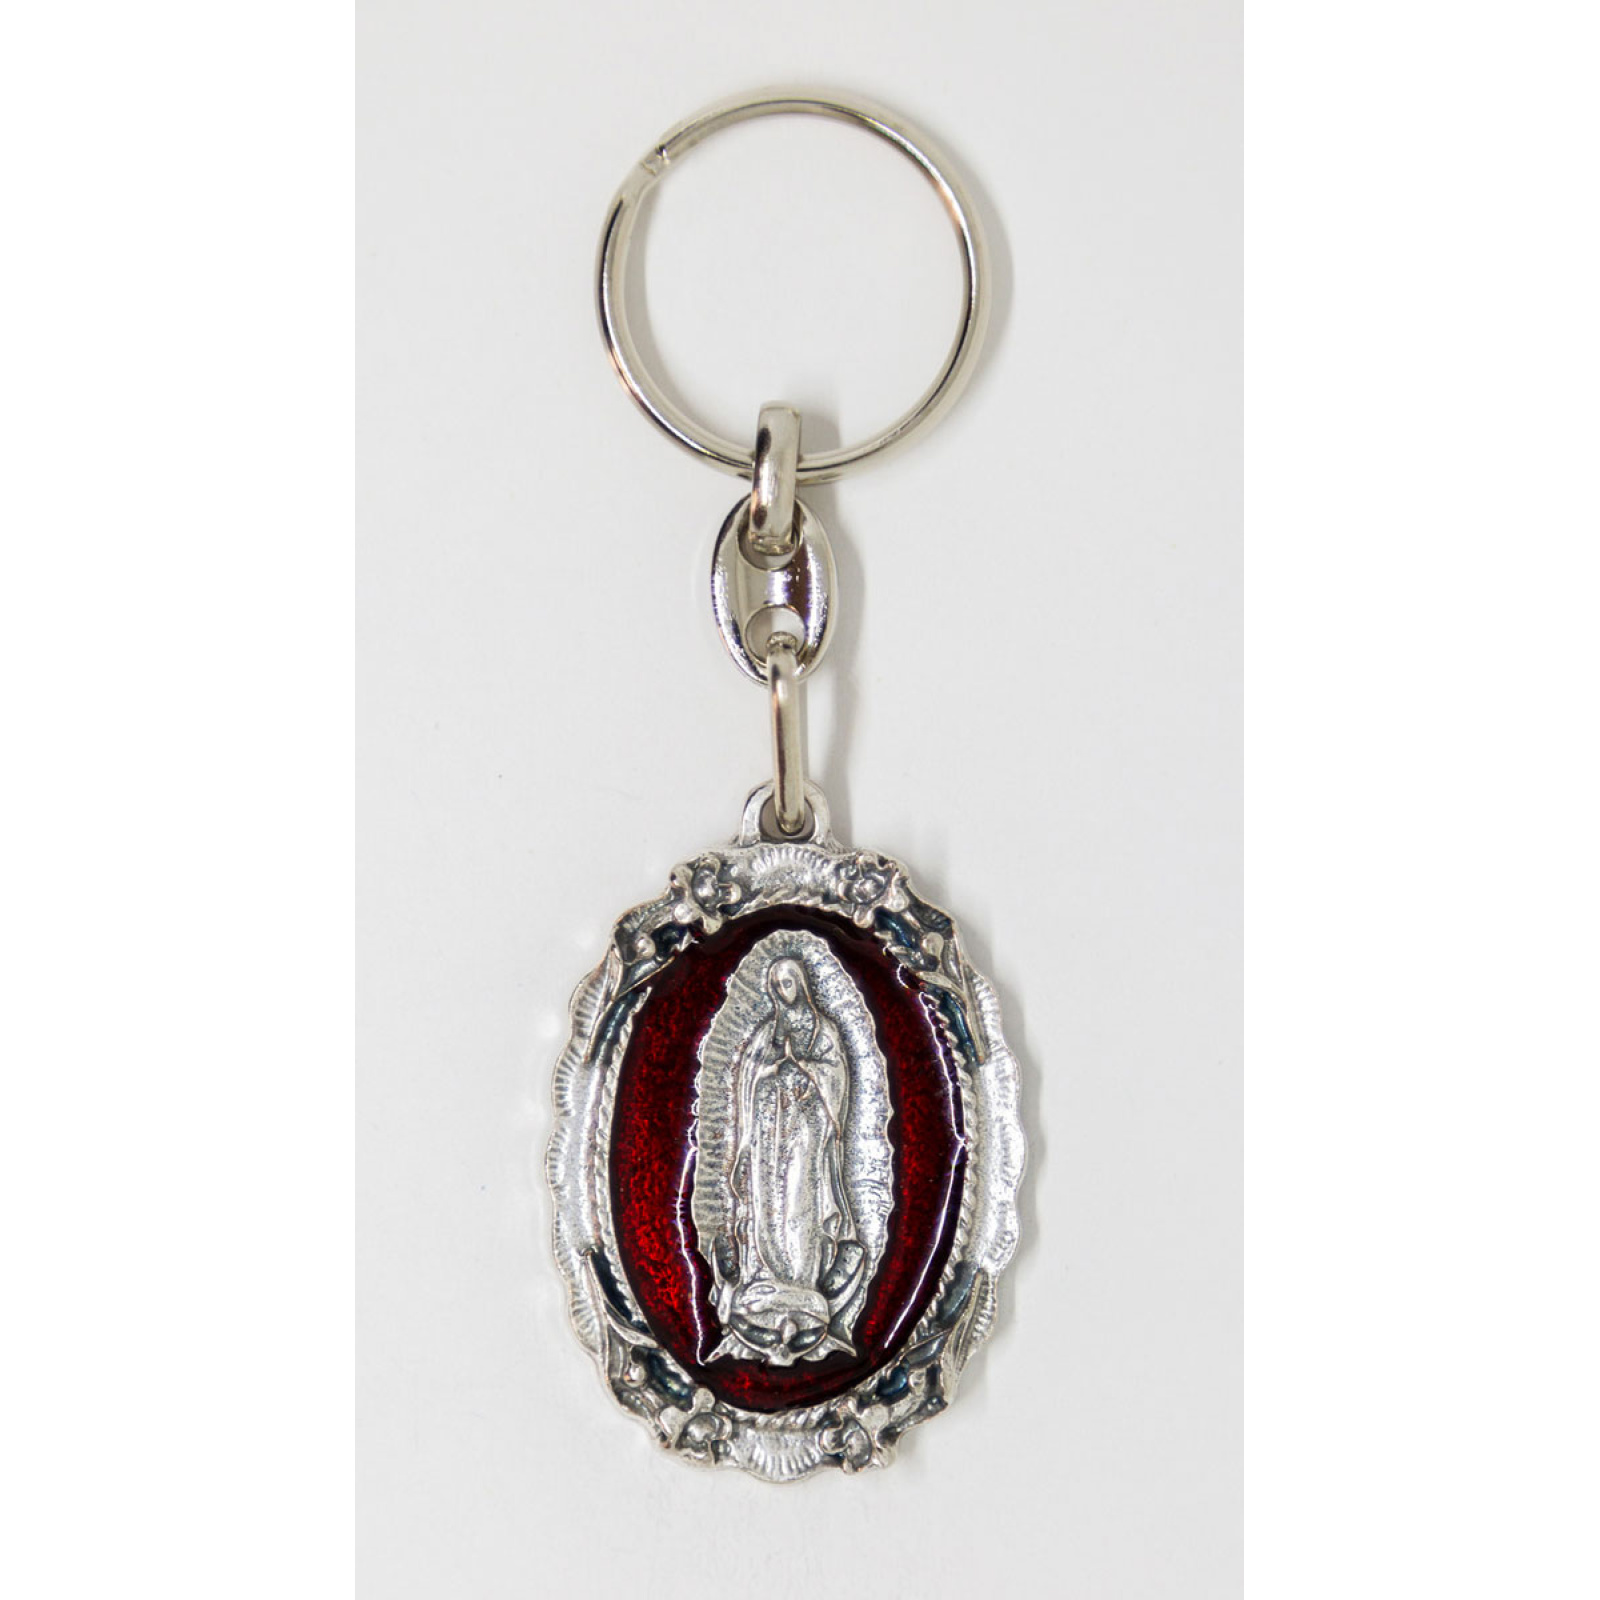 Our Lady of Guadalupe keychain